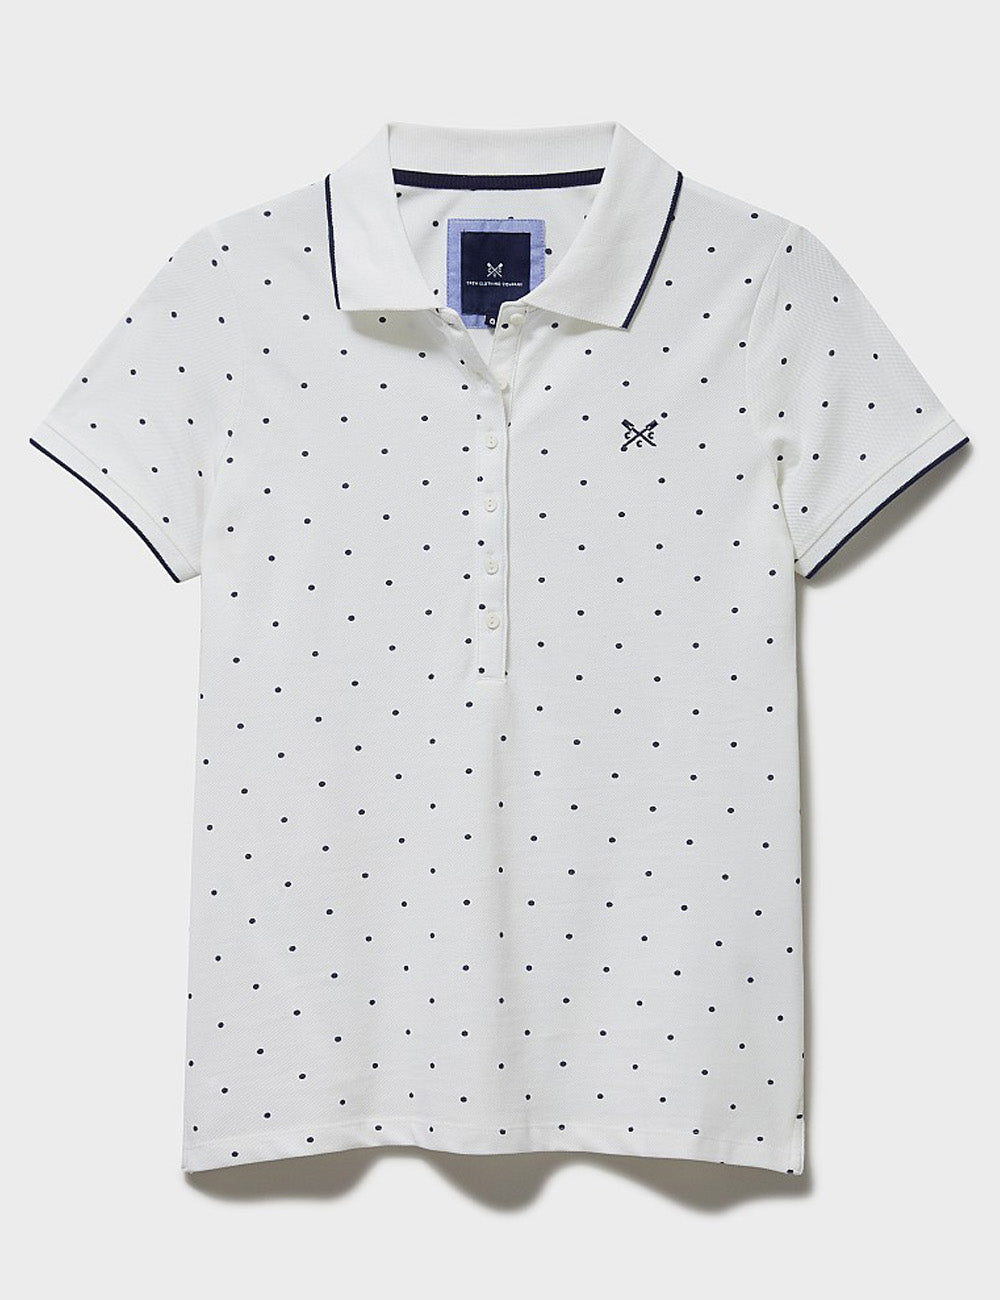 Crew Clothing's Classic Polo Shirt in White/Navy Spot on a white background